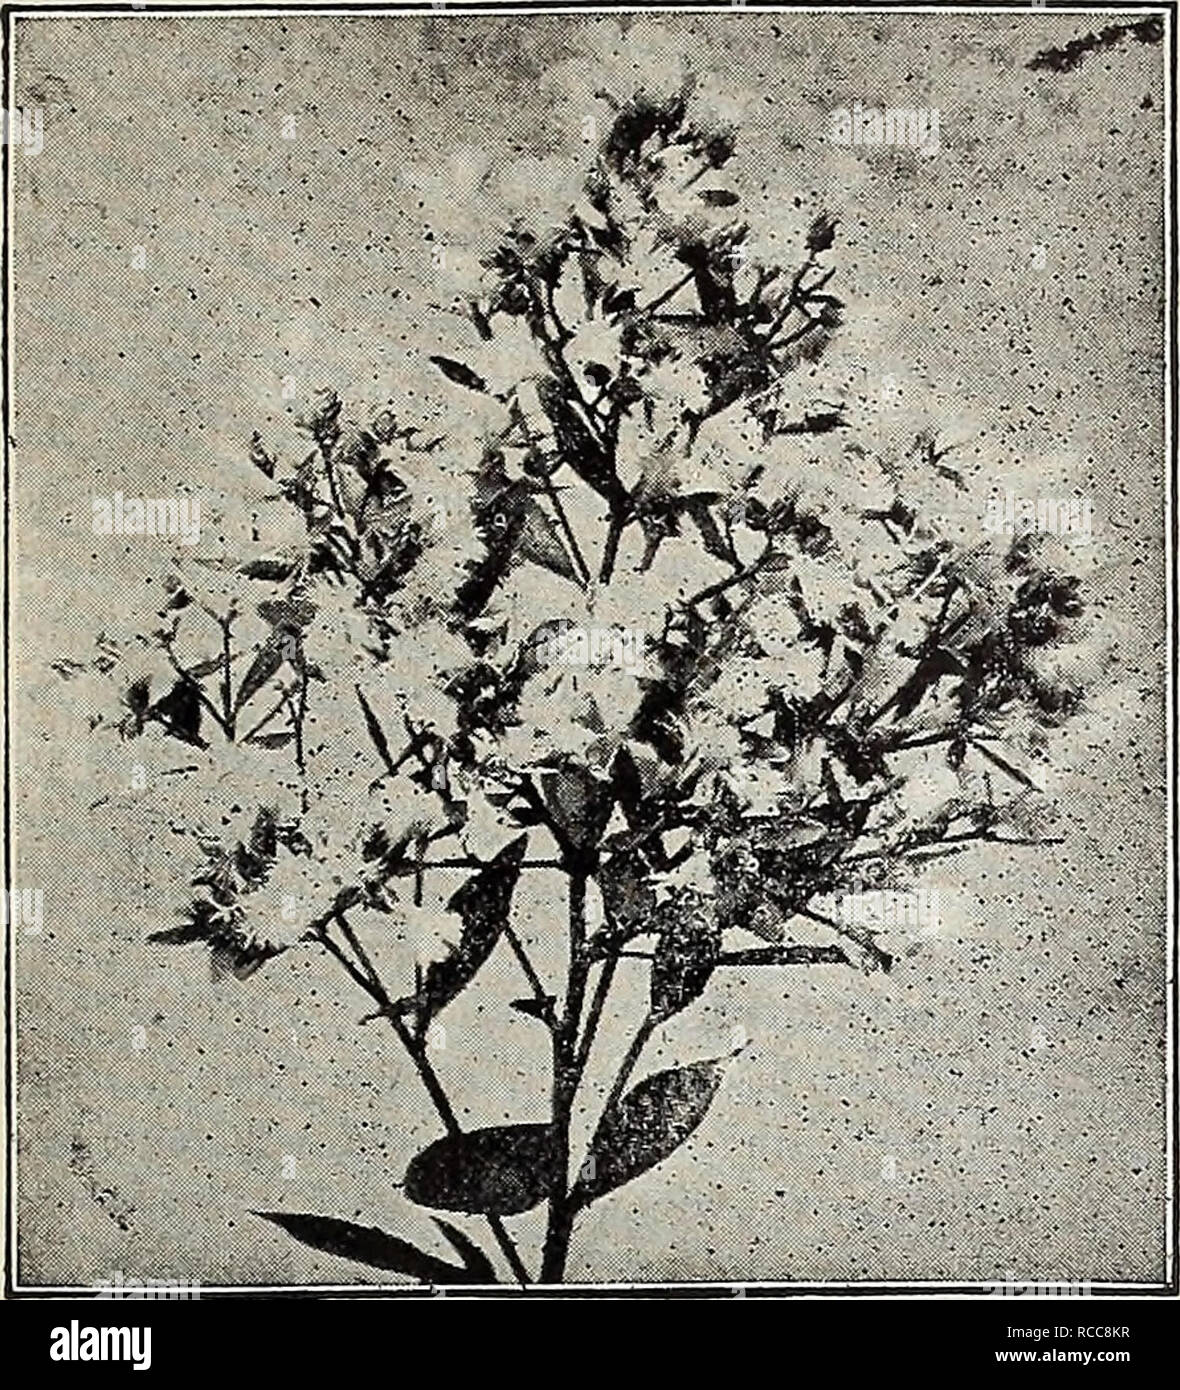 . Dreer's 1907 garden book. Seeds Catalogs; Nursery stock Catalogs; Gardening Equipment and supplies Catalogs; Flowers Seeds Catalogs; Vegetables Seeds Catalogs; Fruit Seeds Catalogs. JlifiHENRTADREER MADELPHIA-PA|jj| CHOICE hABDY^HRUBS j]fjj 191. Baccharis. (Offered on page 19&quot;). Colutea Arborescens (Bfad. der Senna). A large Shrub, with small, delicate foliage and yellow, pea-shaped blos- soms, flowering in June, fol- lowed by reddish pods or bladders. 25 cts. each. Cochorus, or Kerria Japon = ica fl. pi. {Globe Flower). A graceful Shrub, with double- yellow flowers, from June to Octobe Stock Photo